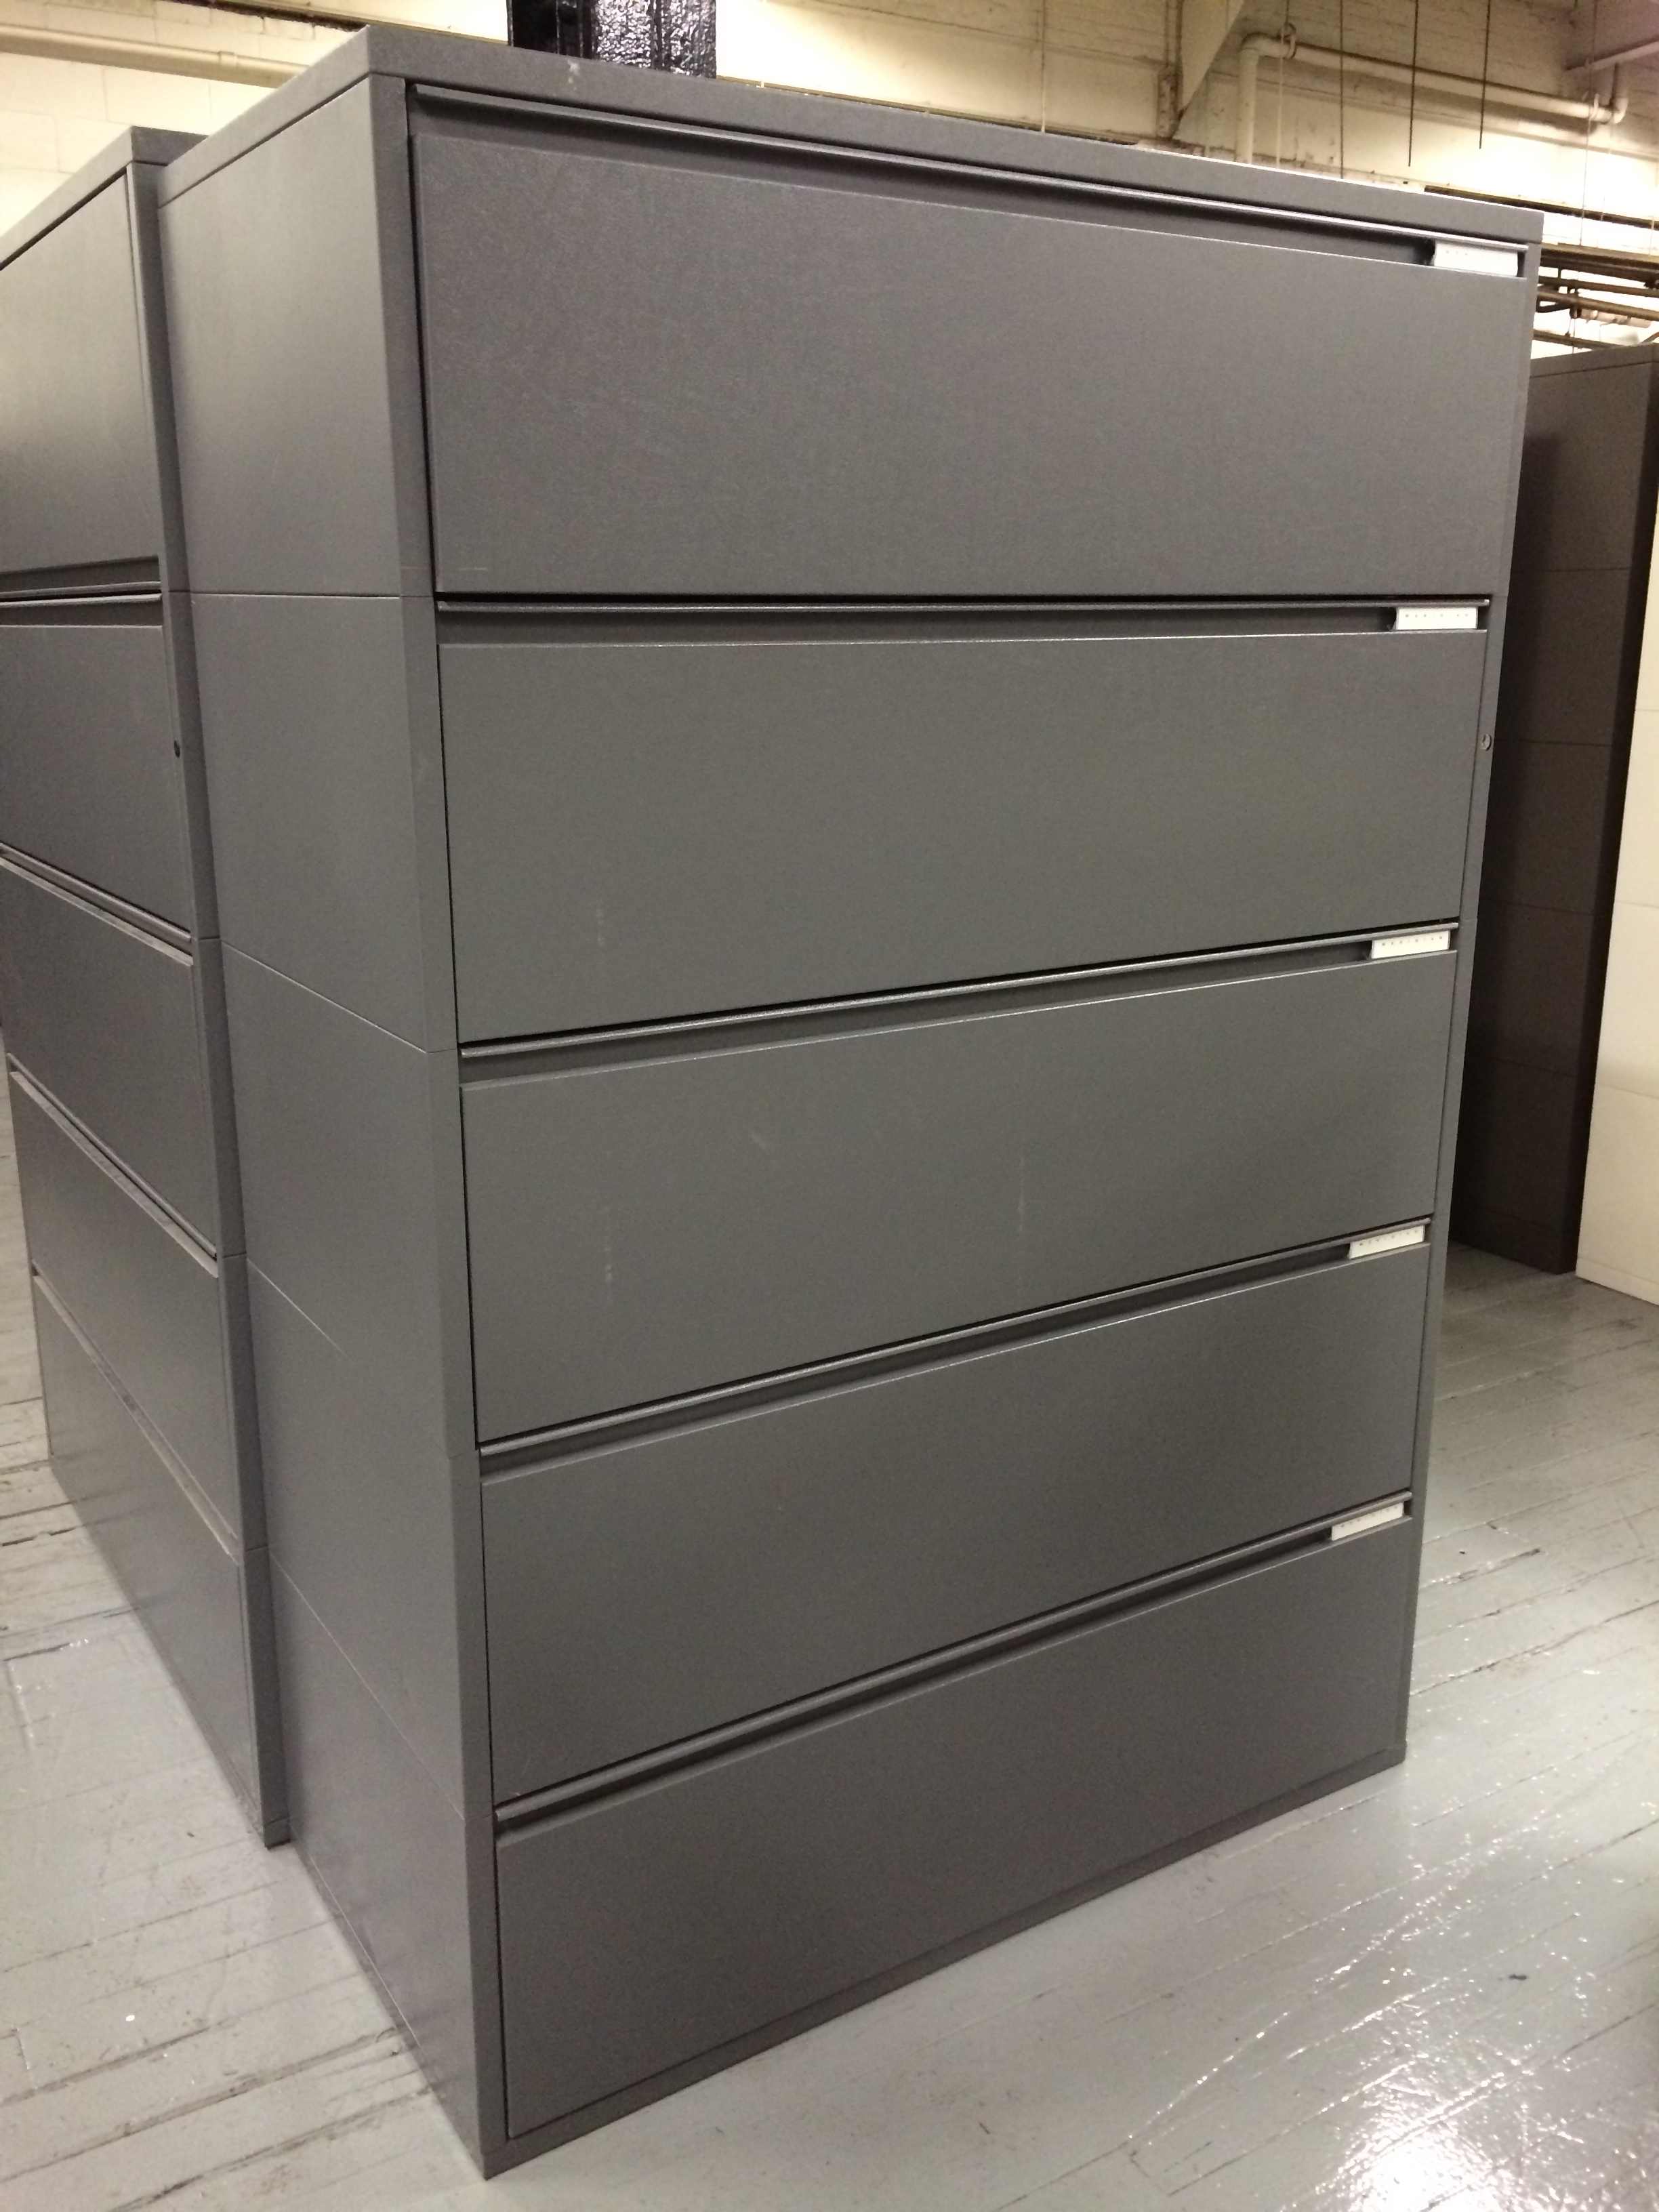 R5 5 Drawer Herman Miller Meridian Lateral File Lexington intended for proportions 2448 X 3264